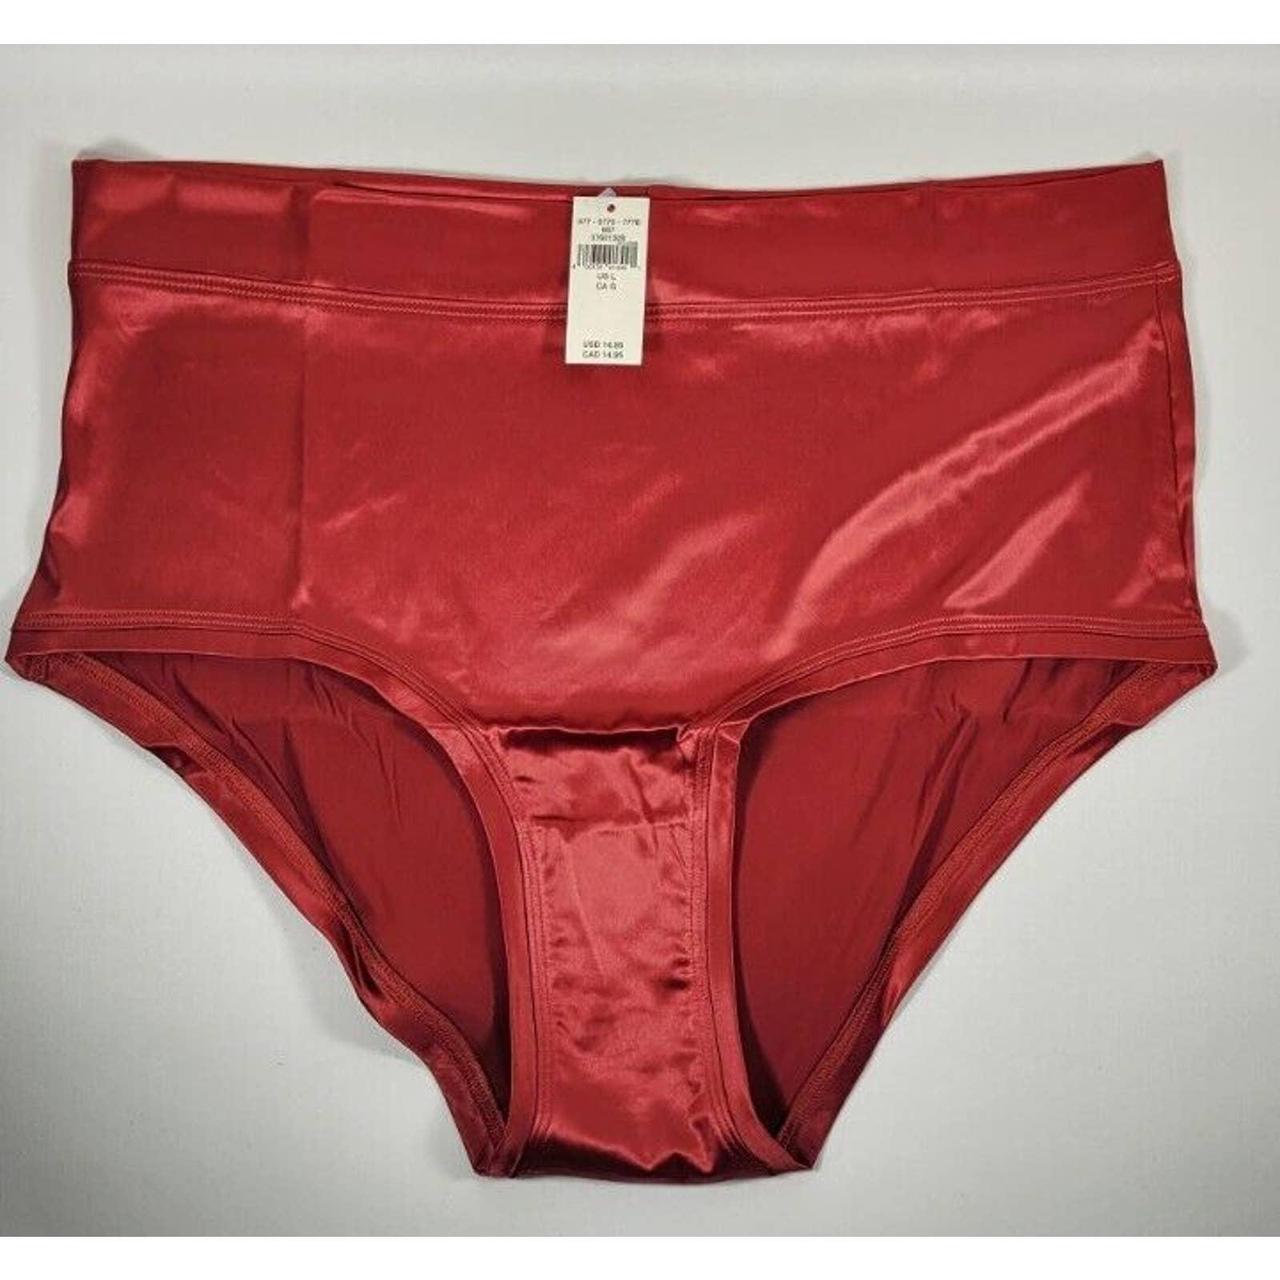 Aerie Women's Black and Red Panties (2)